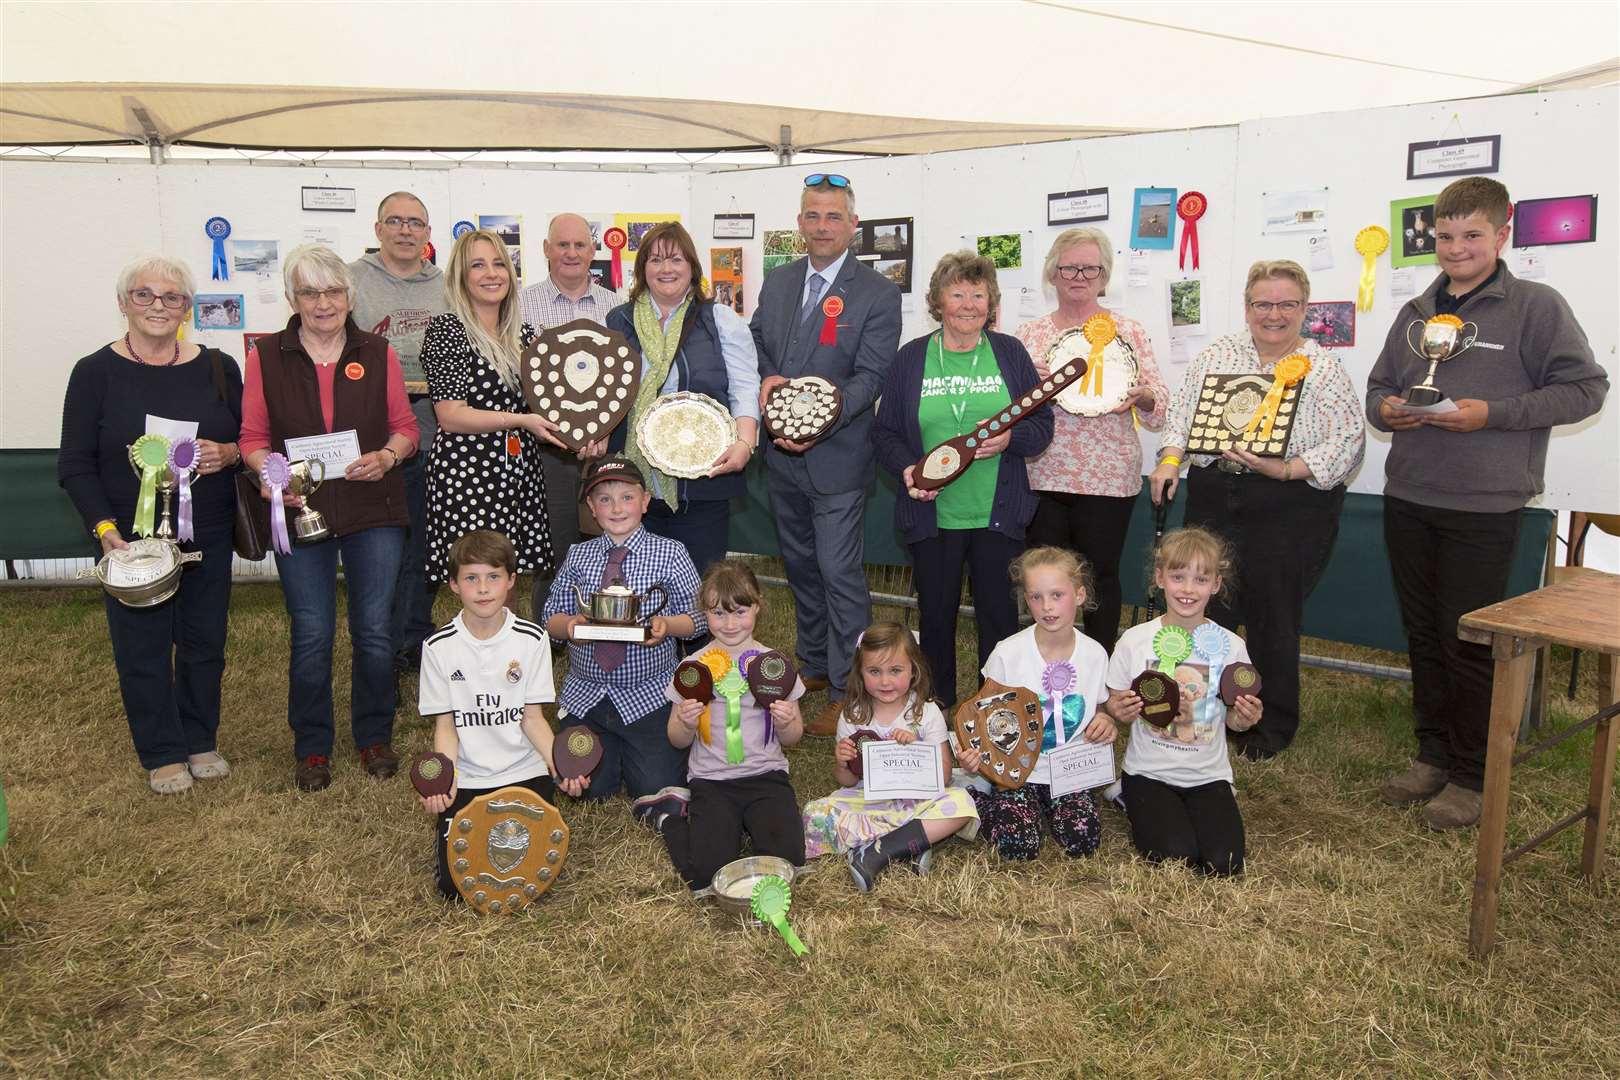 Shirley Mackay (centre), of Thorsdale View, Thurso, received the trophies for best exhibit and most points overall in the industrial section. She is pictured receiving her trophies from Caithness Agricultural Society president John Murray and his partner Jessica Dreaves. Looking on are some of the other winners. Picture: Robert MacDonald / Northern Studios